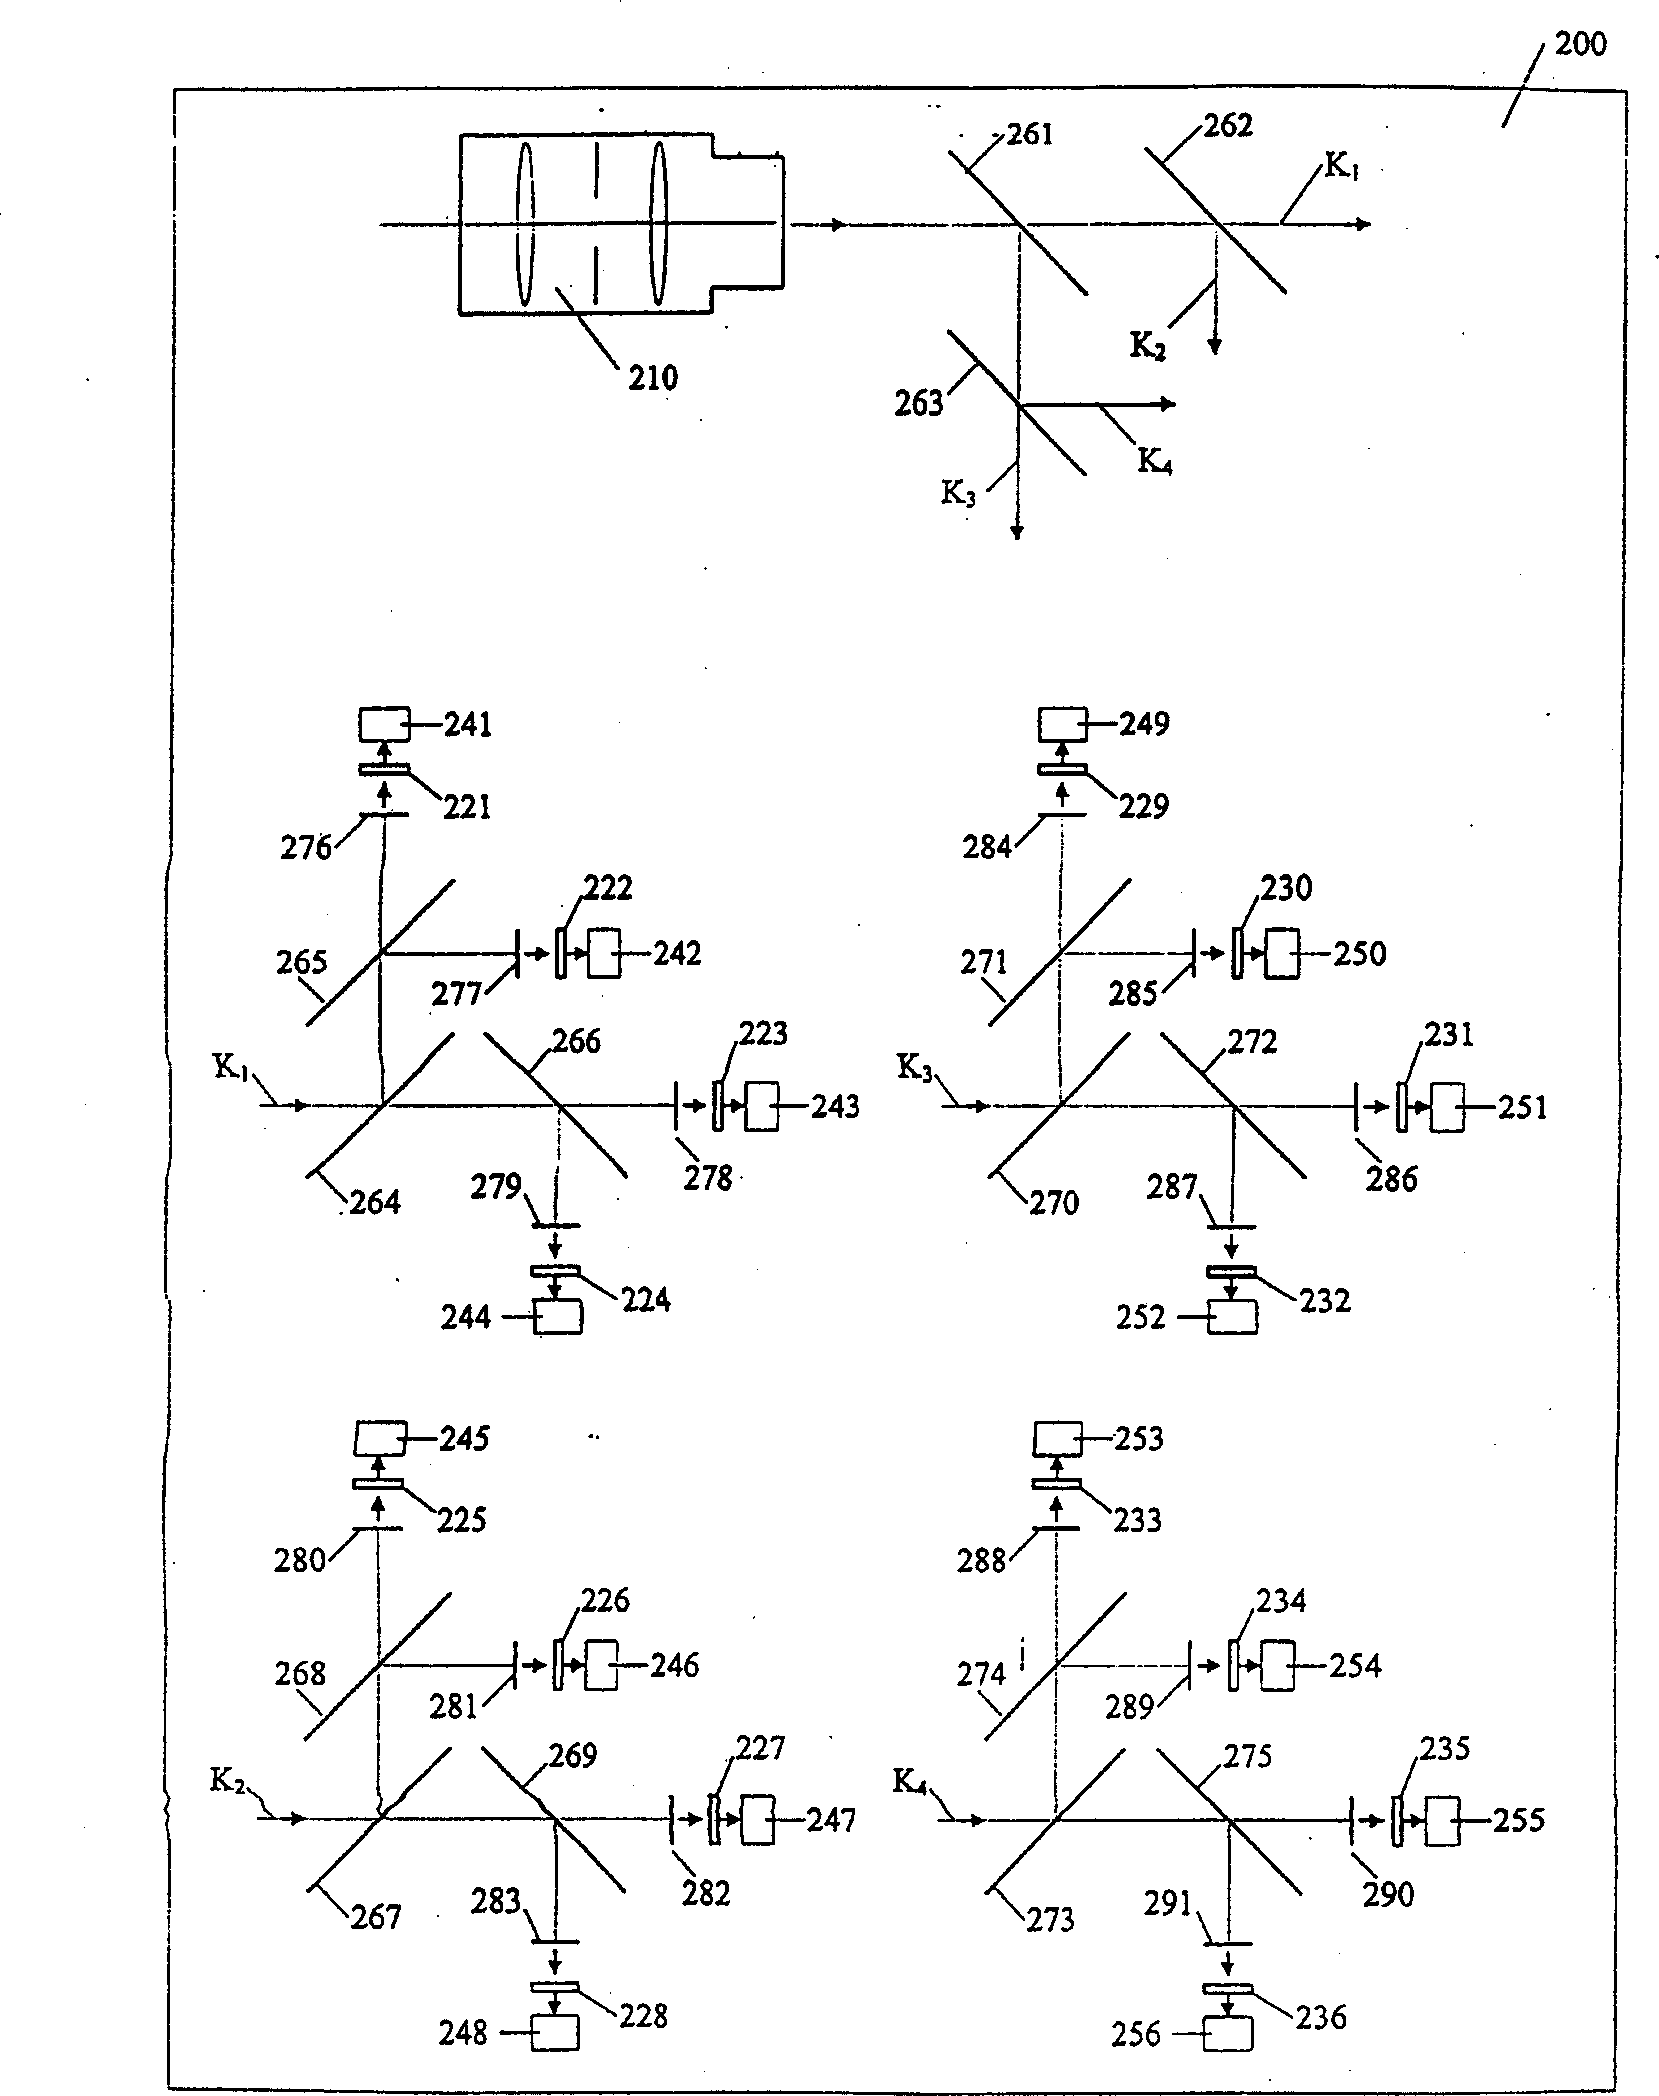 Individual element photoelectric measuring device for pane object